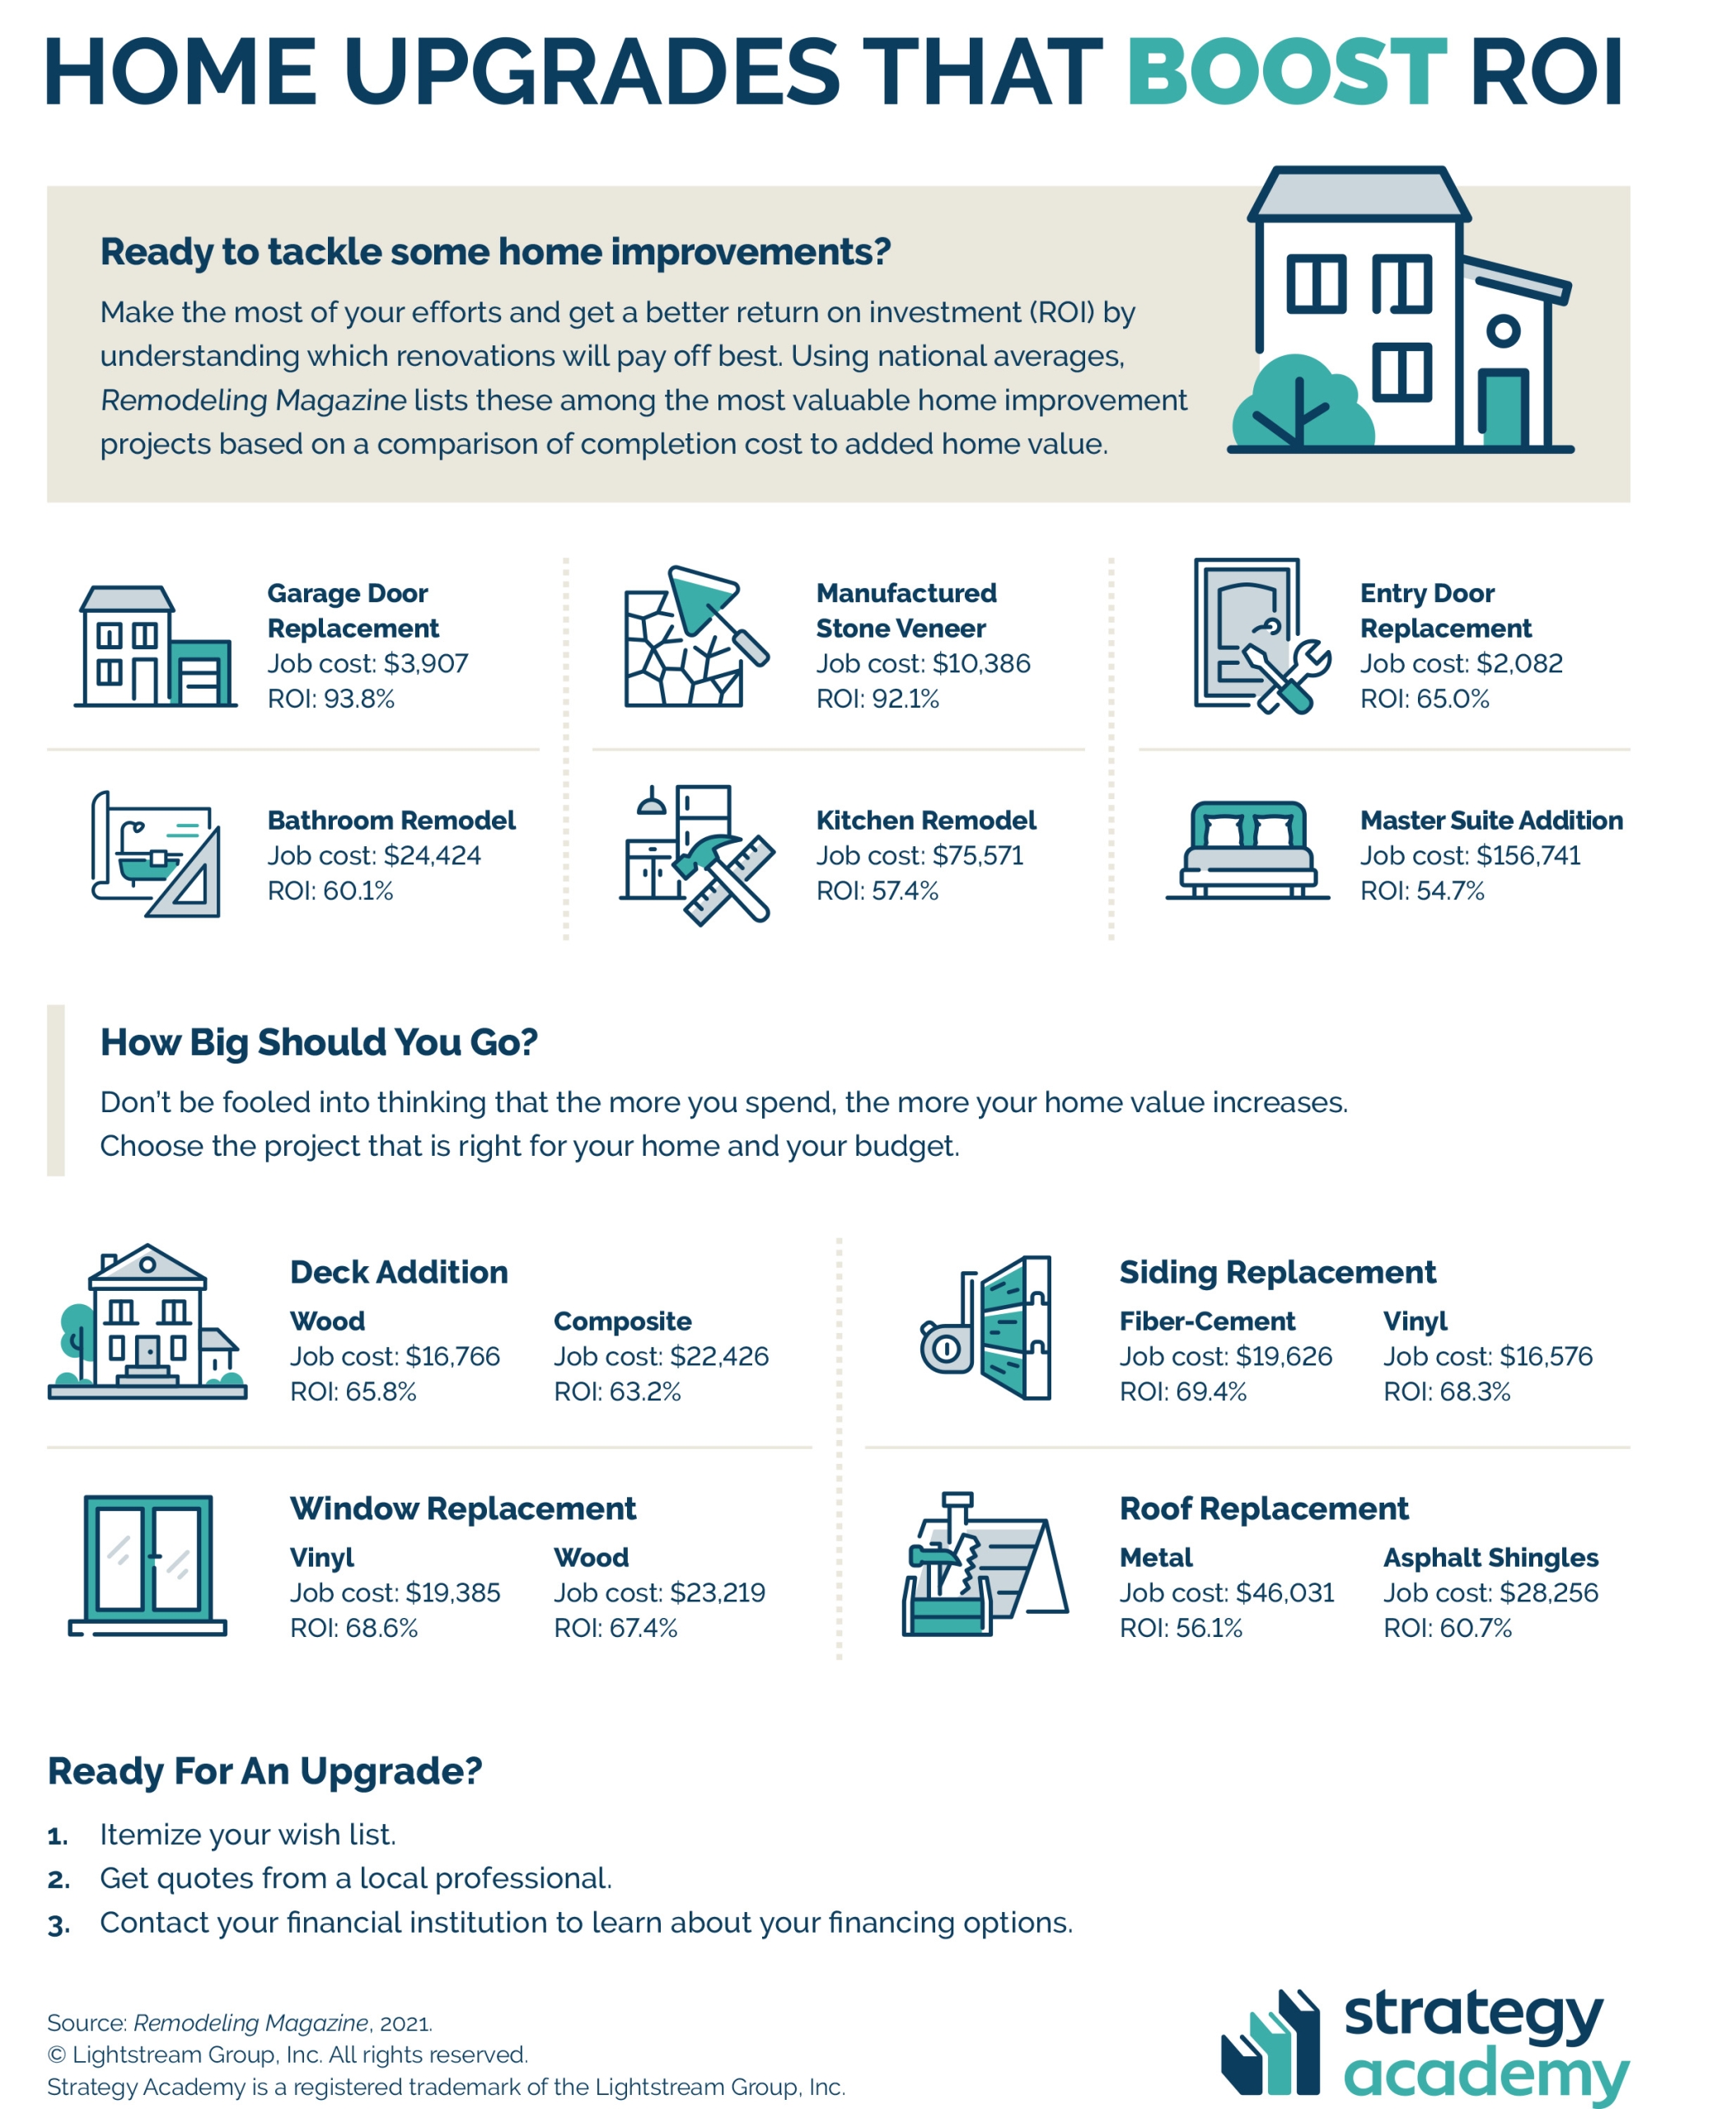 Home Upgrades that Boost ROI